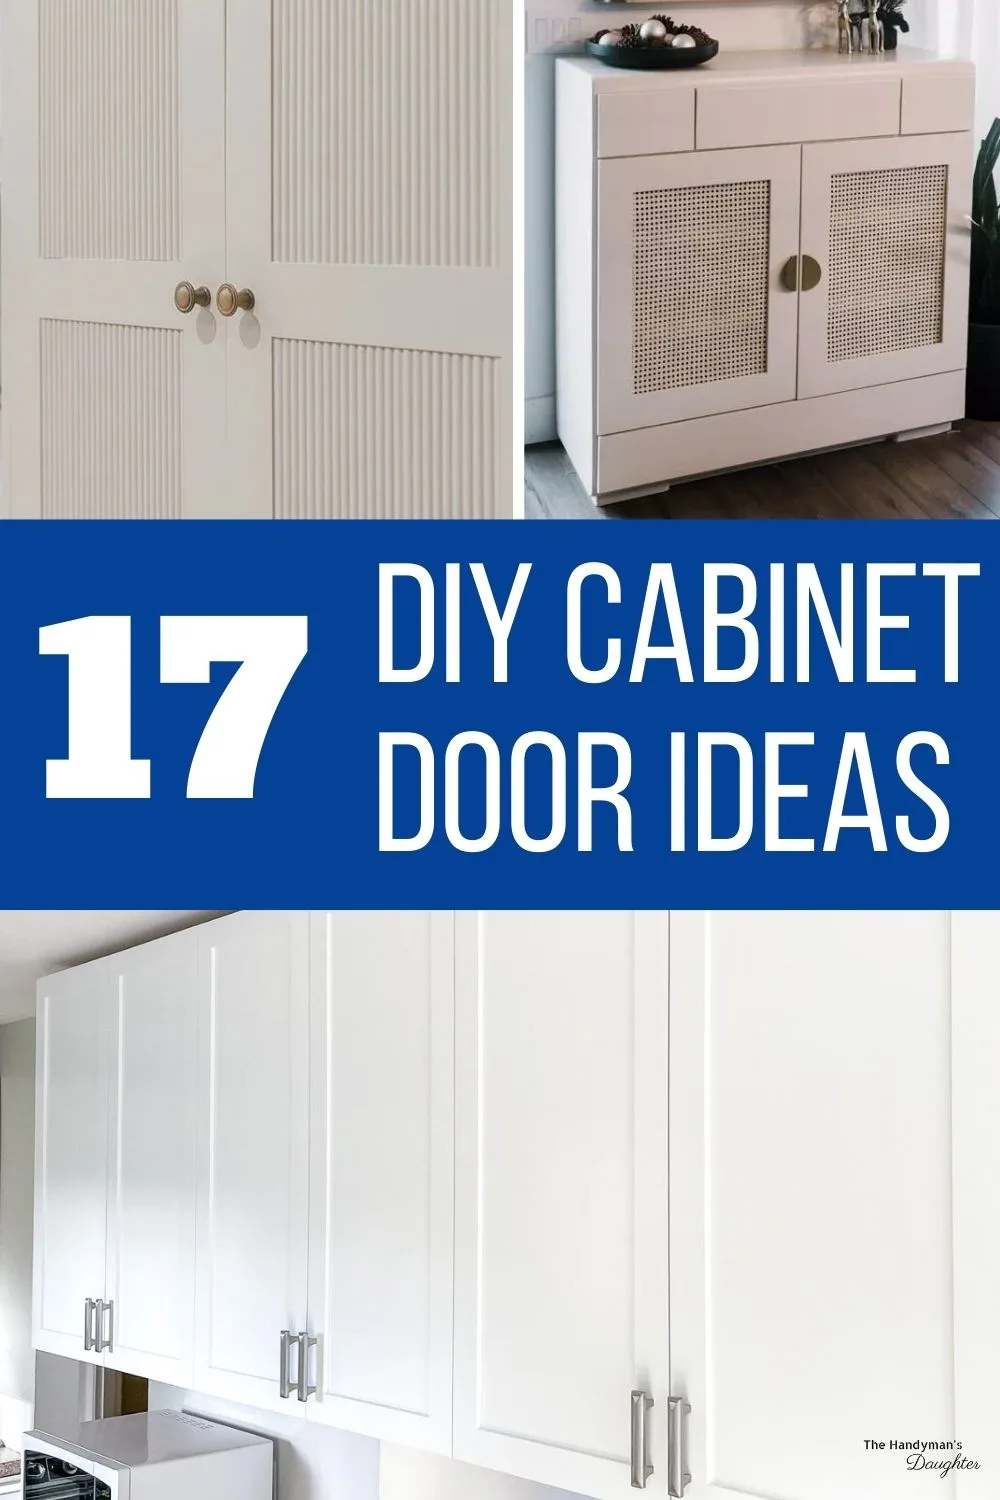 10 Simple Ideas to Update your Kitchen Cabinets - Jenna Sue Design